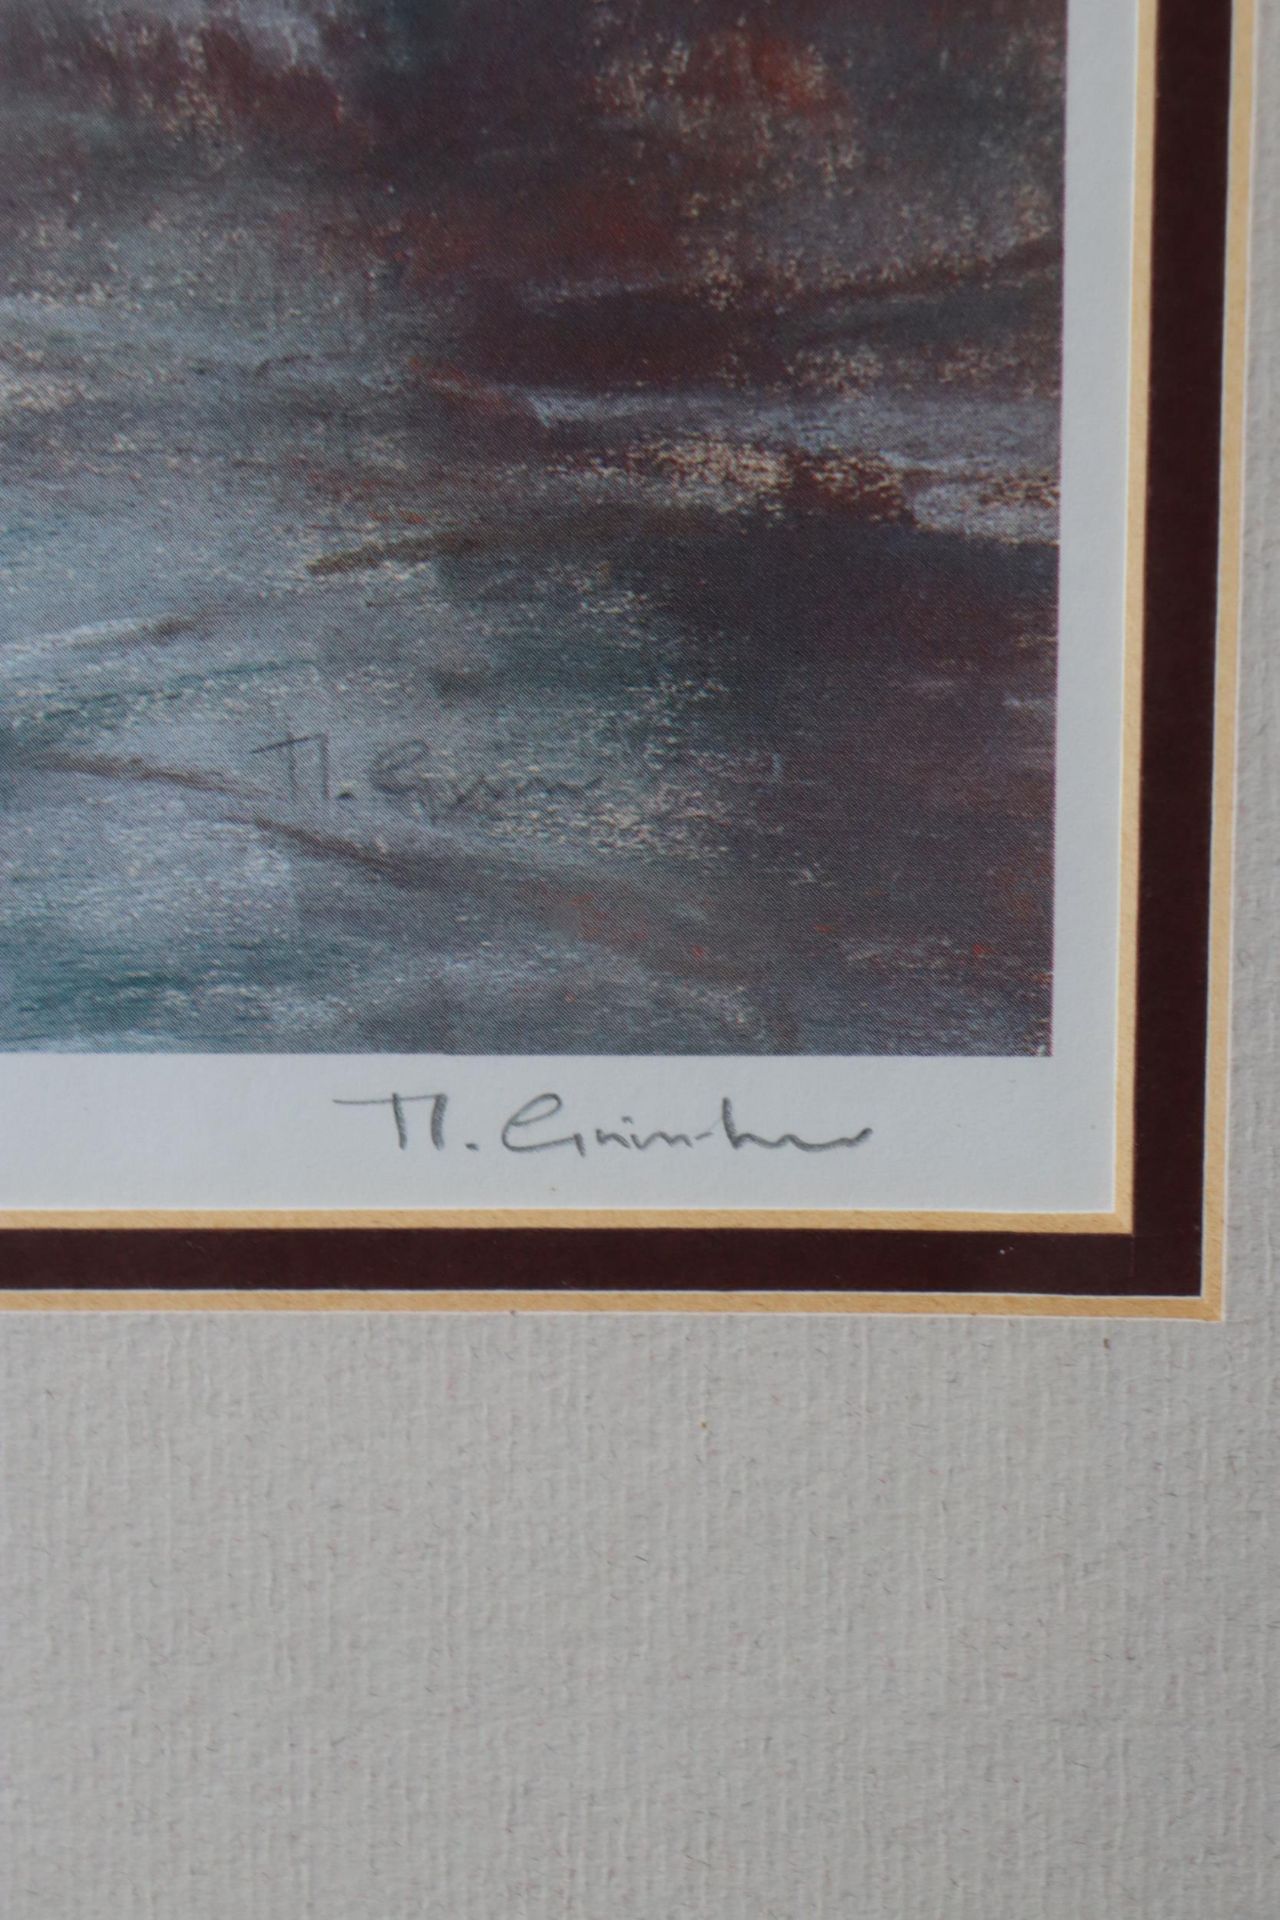 A SIGNED MARC GRIMSHAW PRINT OF A LITTLE GIRL AND BOY KISSING - Image 2 of 6